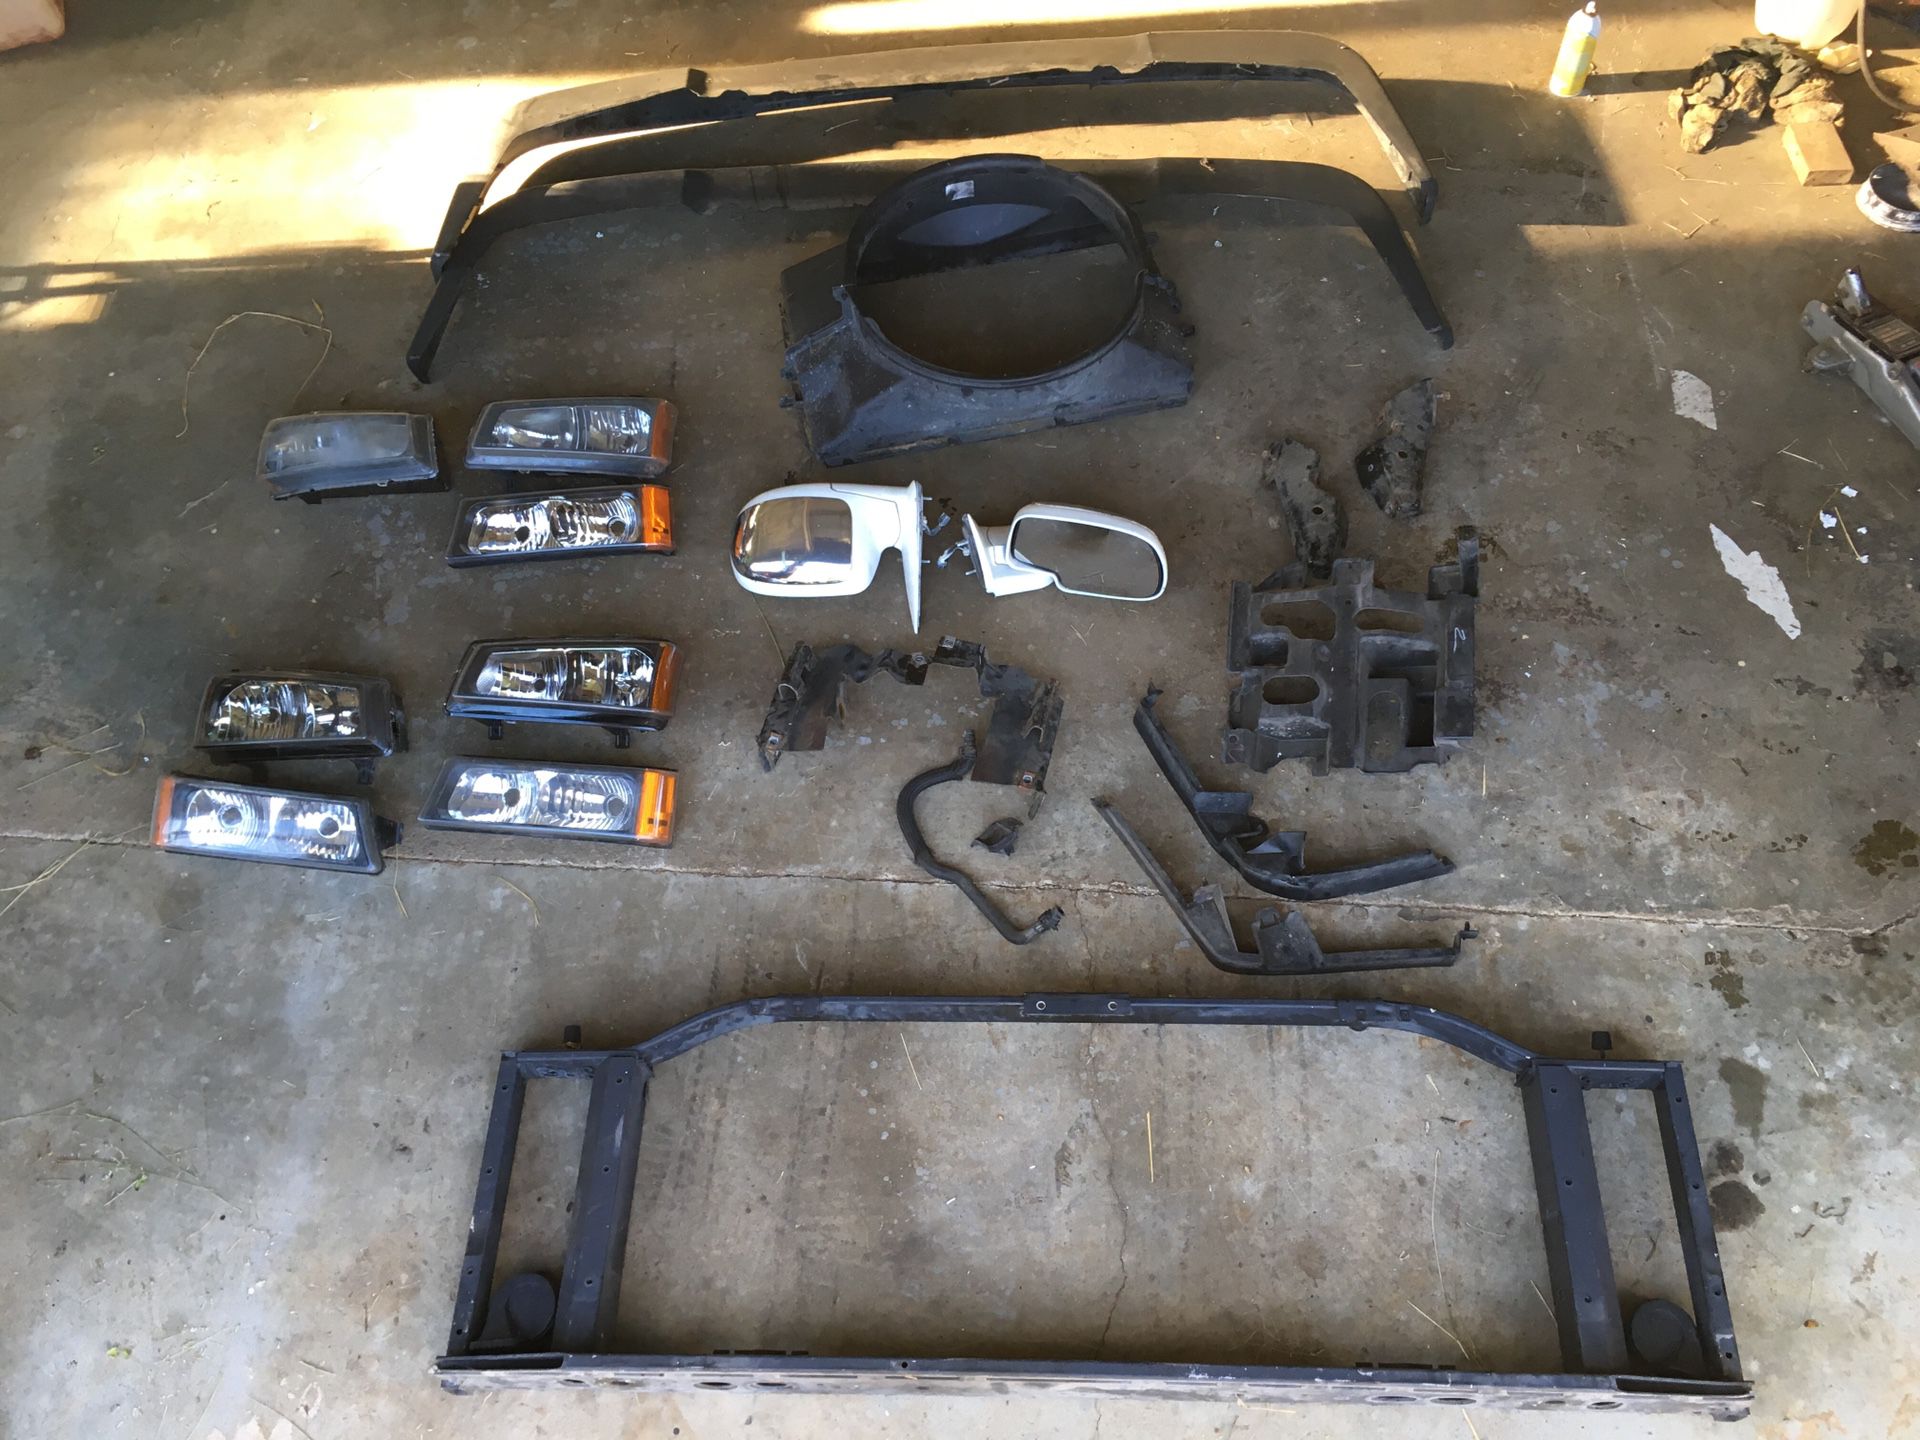 Chevy Silverado 1500 and 2500 HD parts. Front end and power mirrors. Should fit years 03 - 06